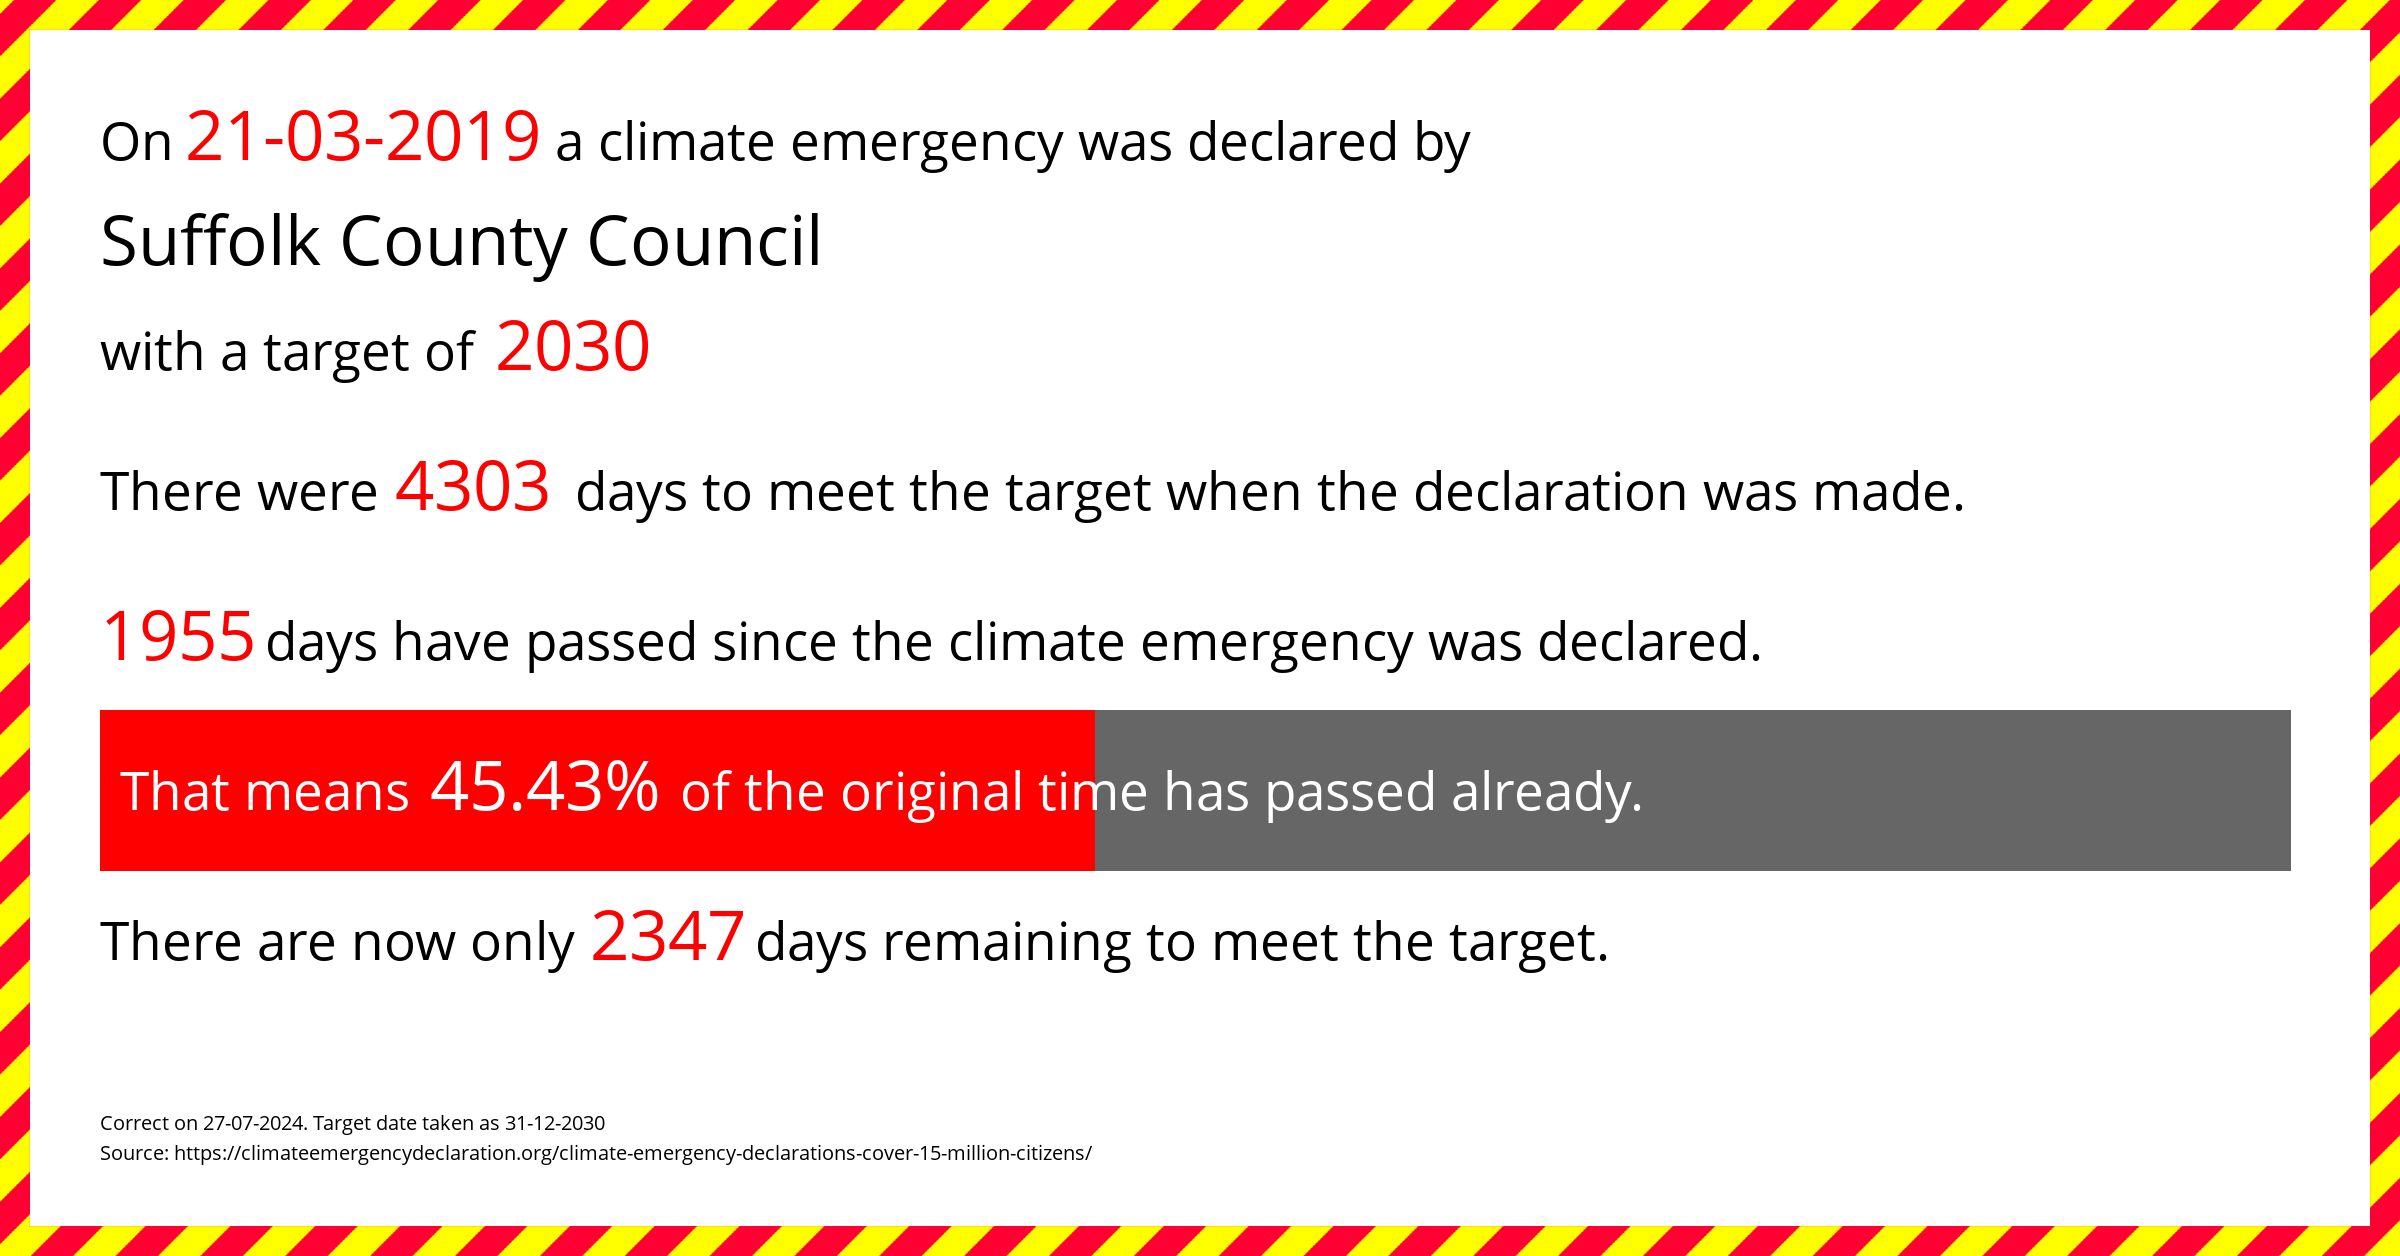 Suffolk County Council declared a Climate emergency on Thursday 21st March 2019, with a target of 2030.